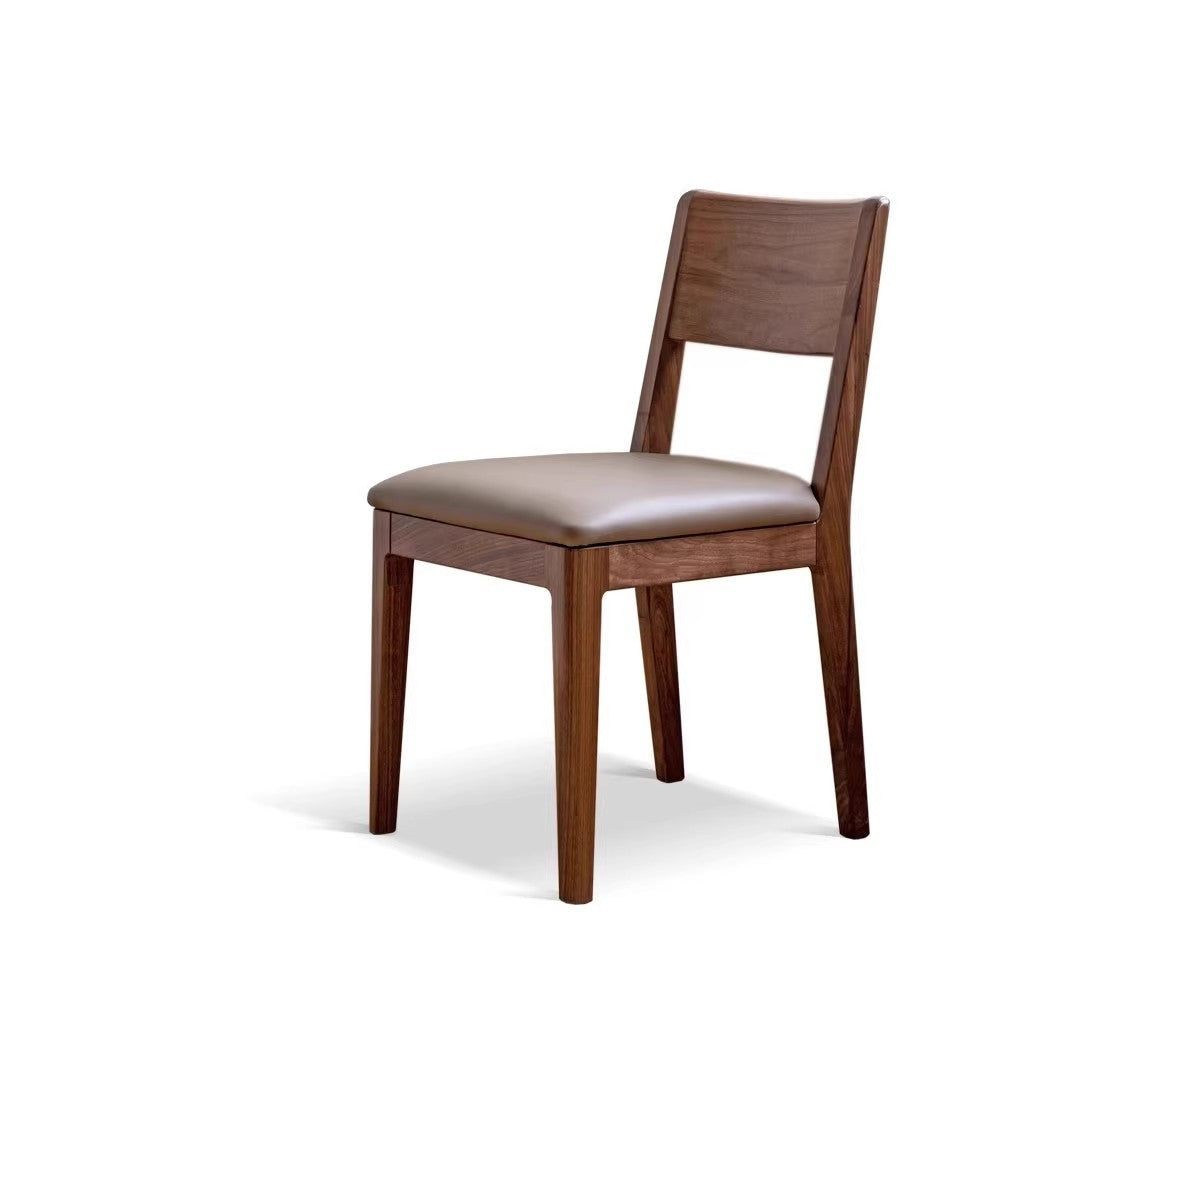 2 pcs set -Solid wood dining chair modern-